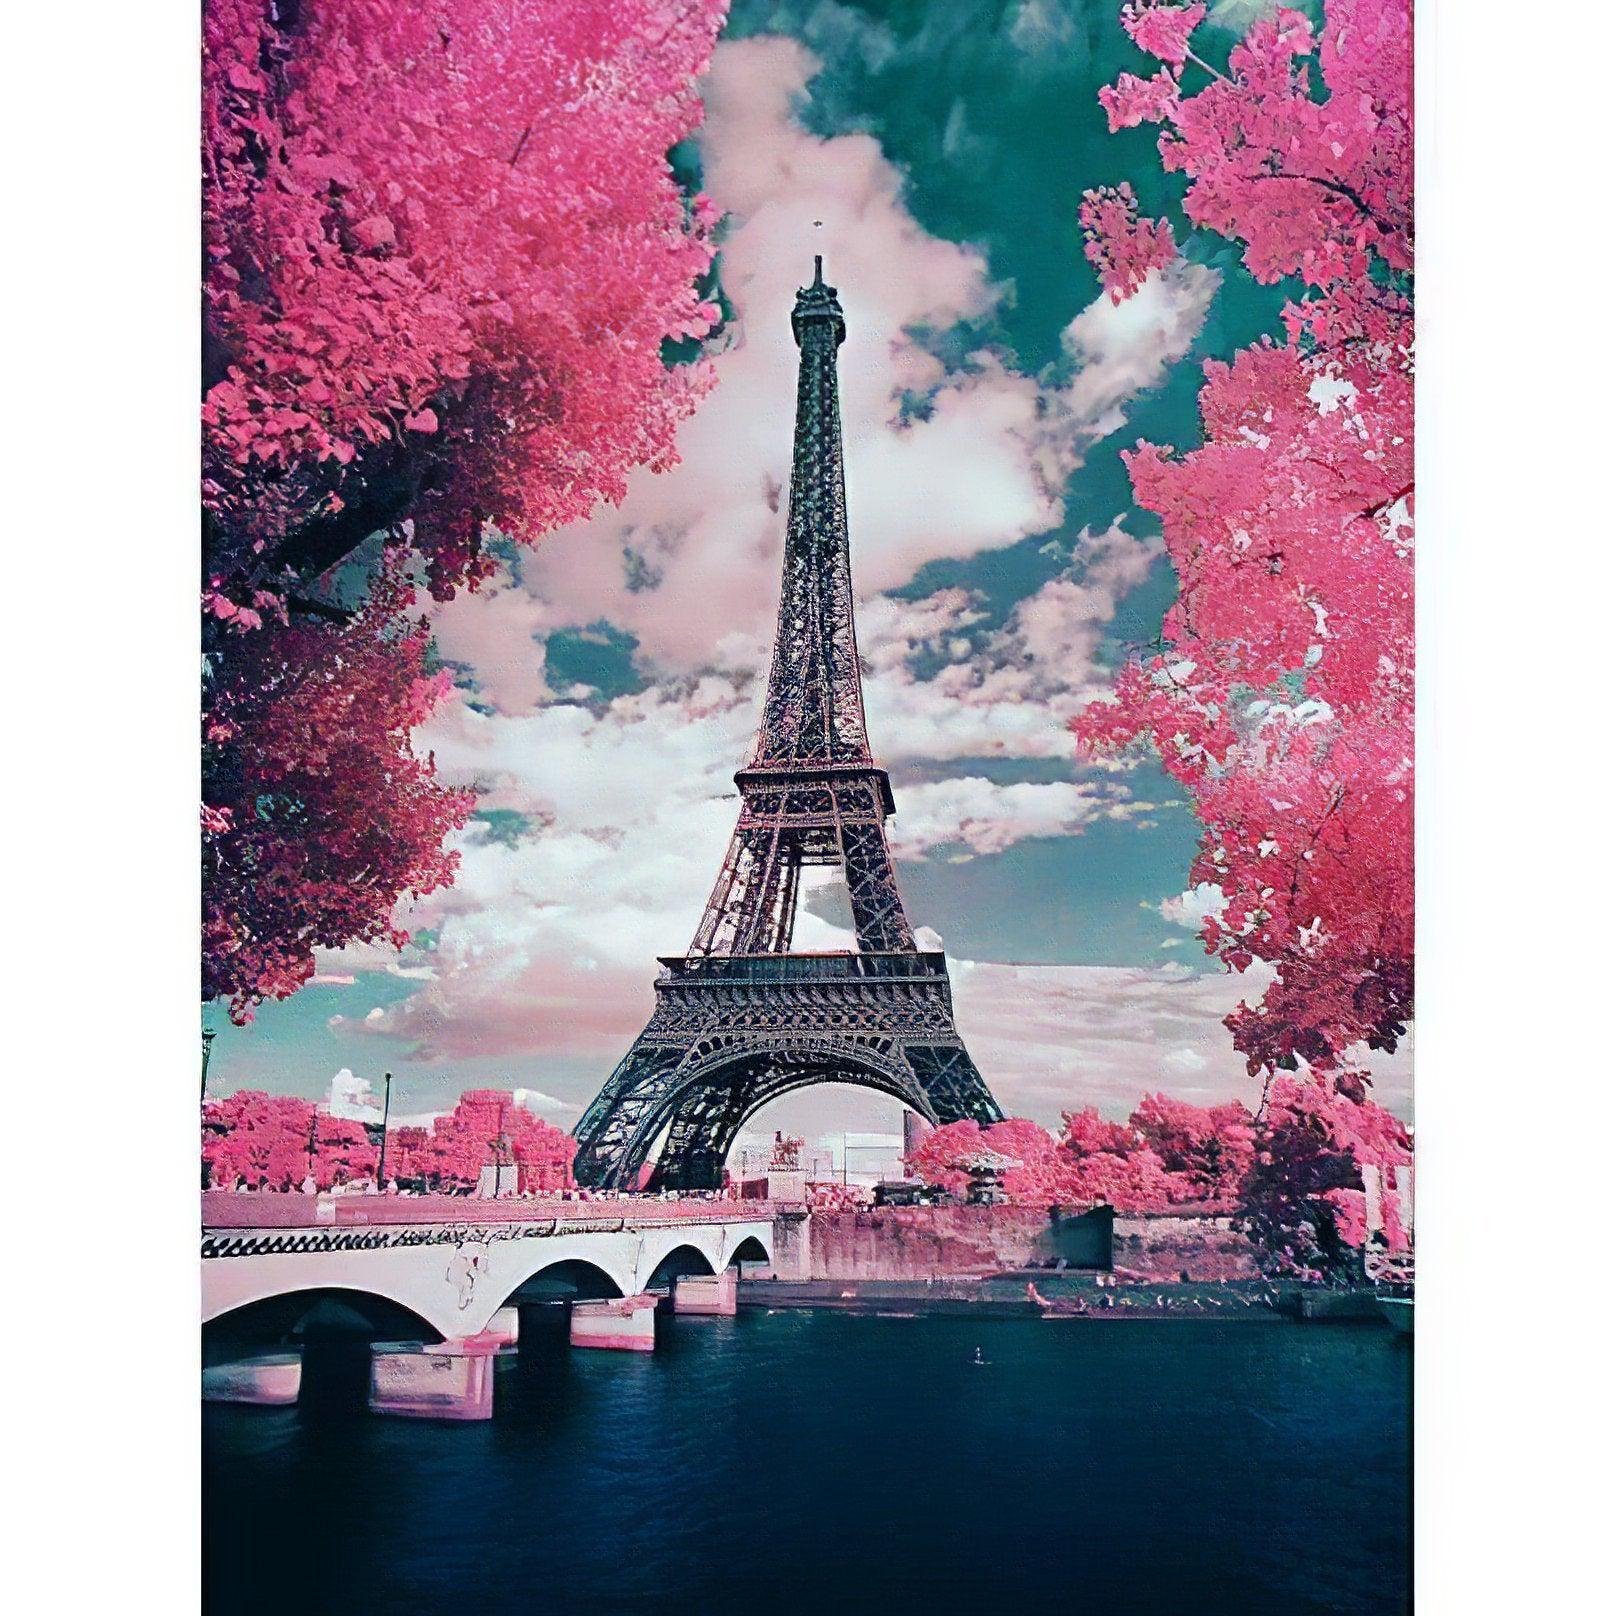 Enjoy a romantic scene featuring the Eiffel Tower surrounded by lush roses.Rosey View Of Eiffel Tower - Diamondartlove